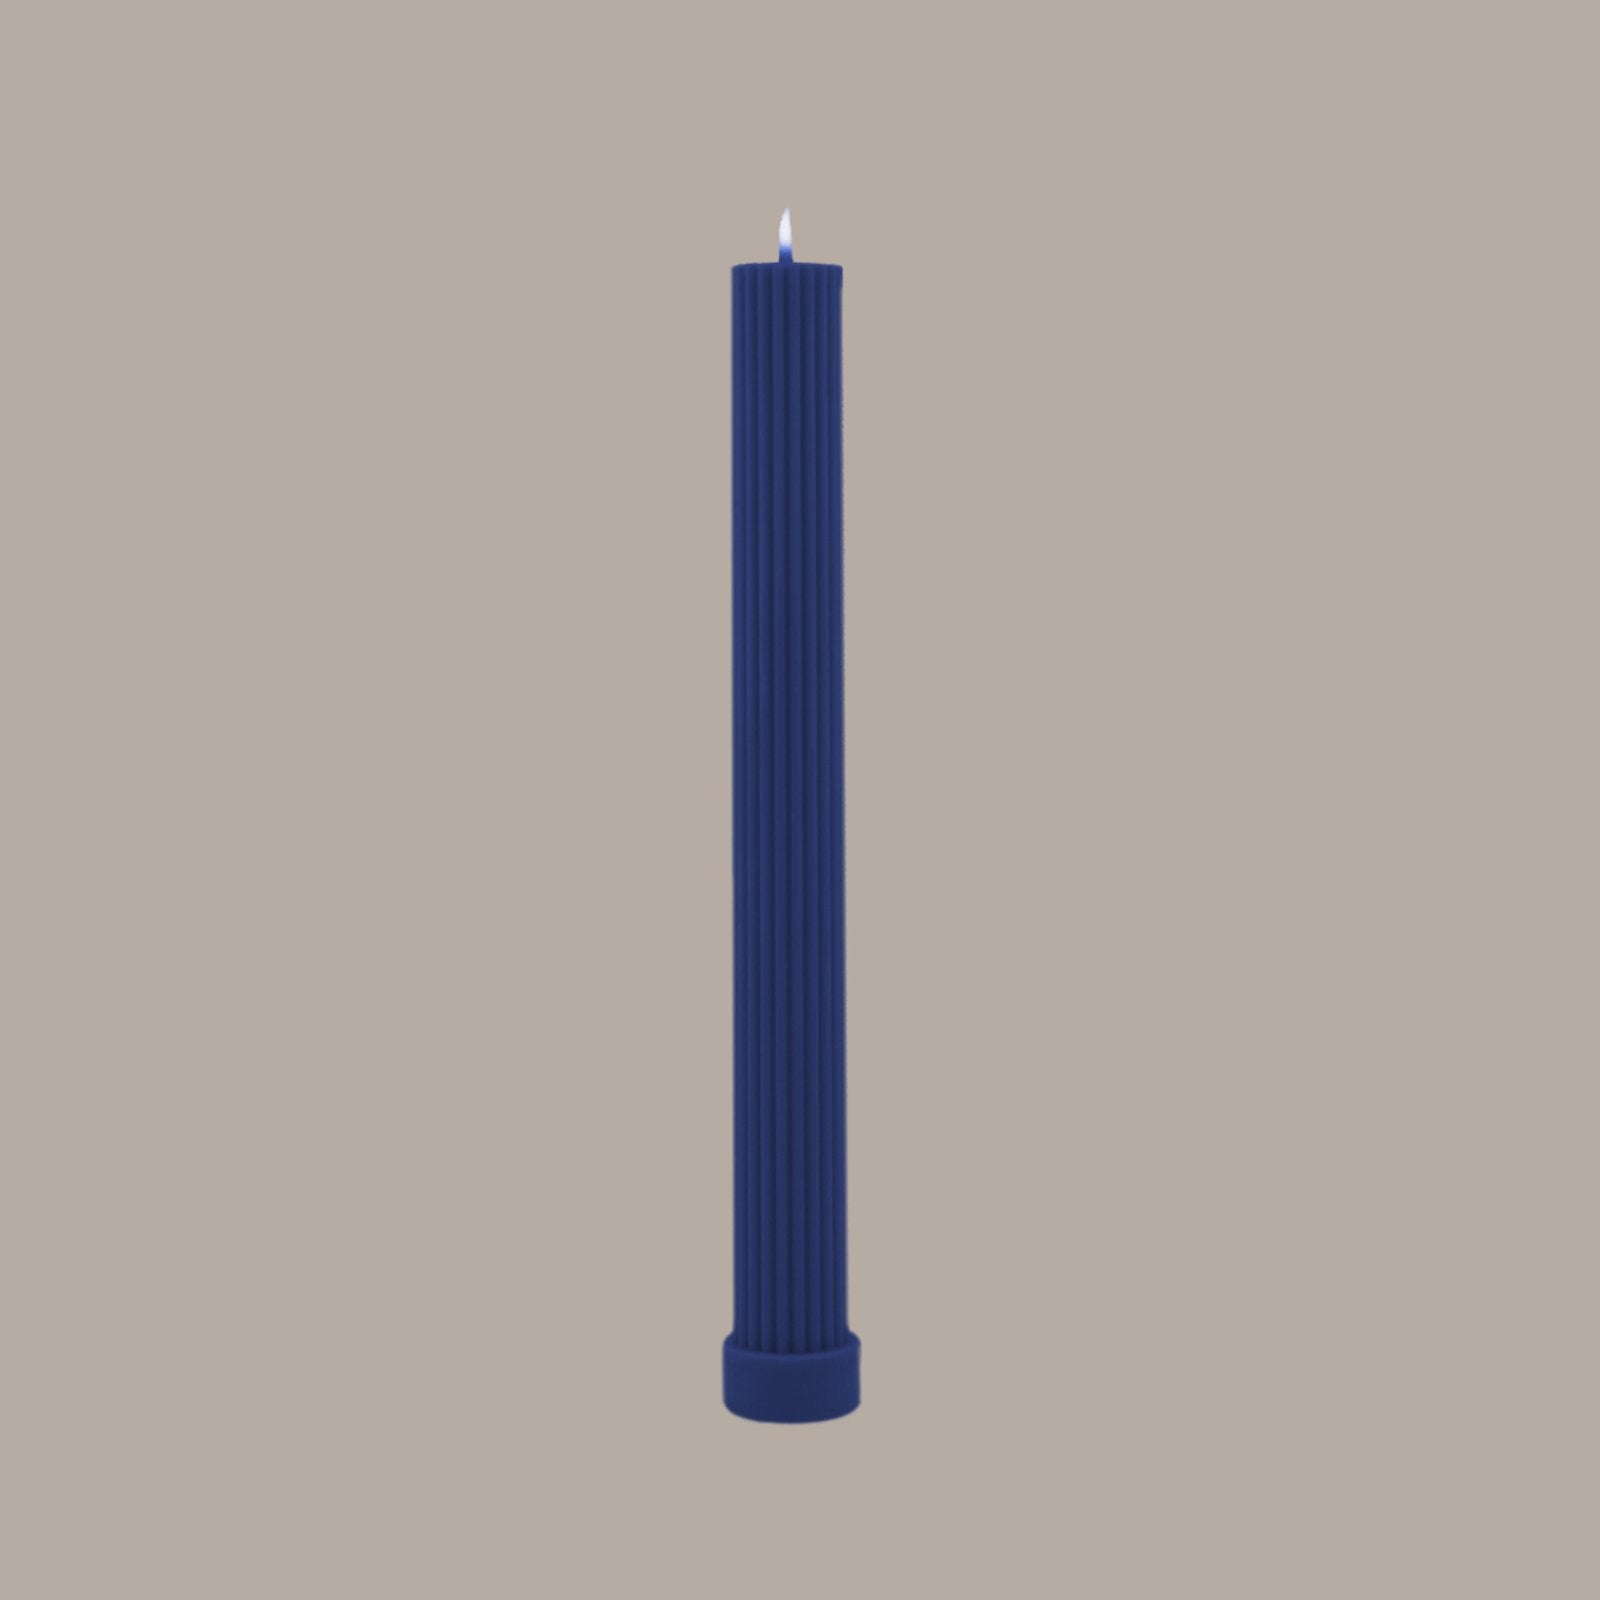 Our Column pillar candles are made from refined soy wax and good for home decoration. All candles in this collection are unscented. Please use a candle holder or candle plate underneath for the t